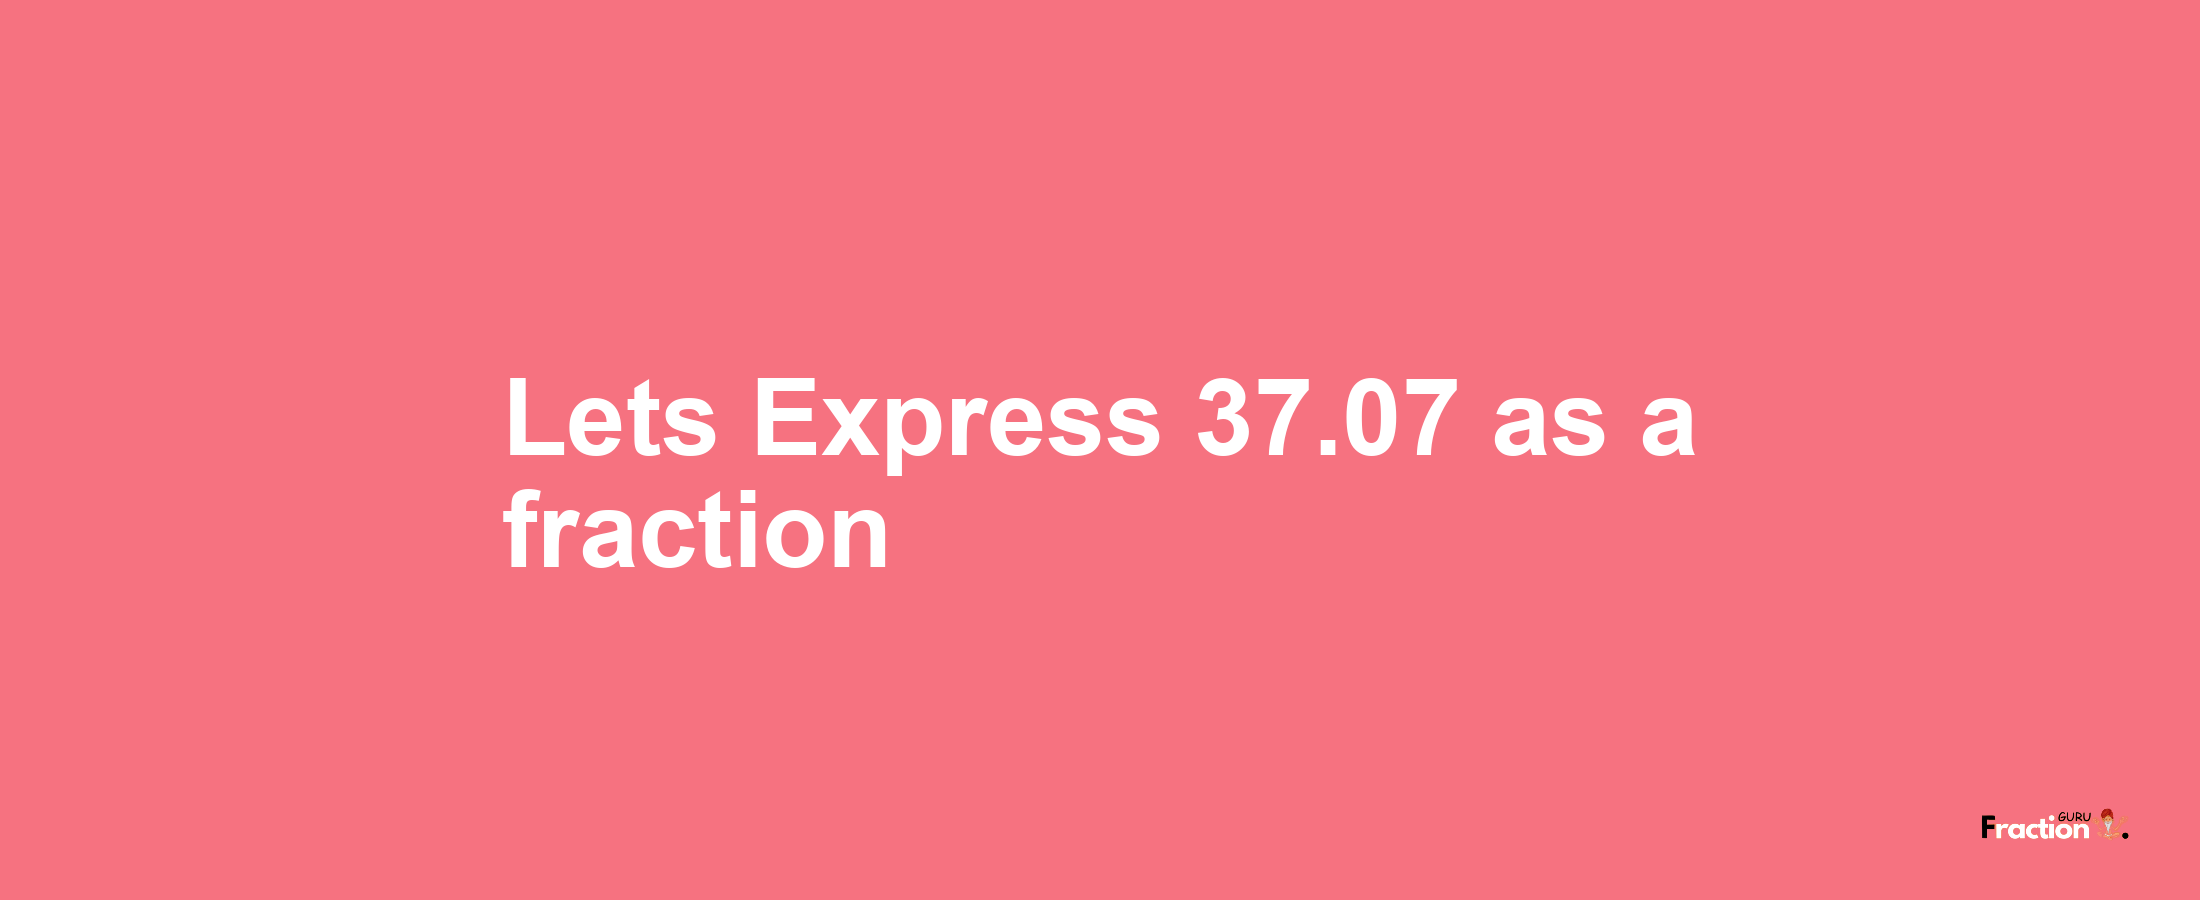 Lets Express 37.07 as afraction